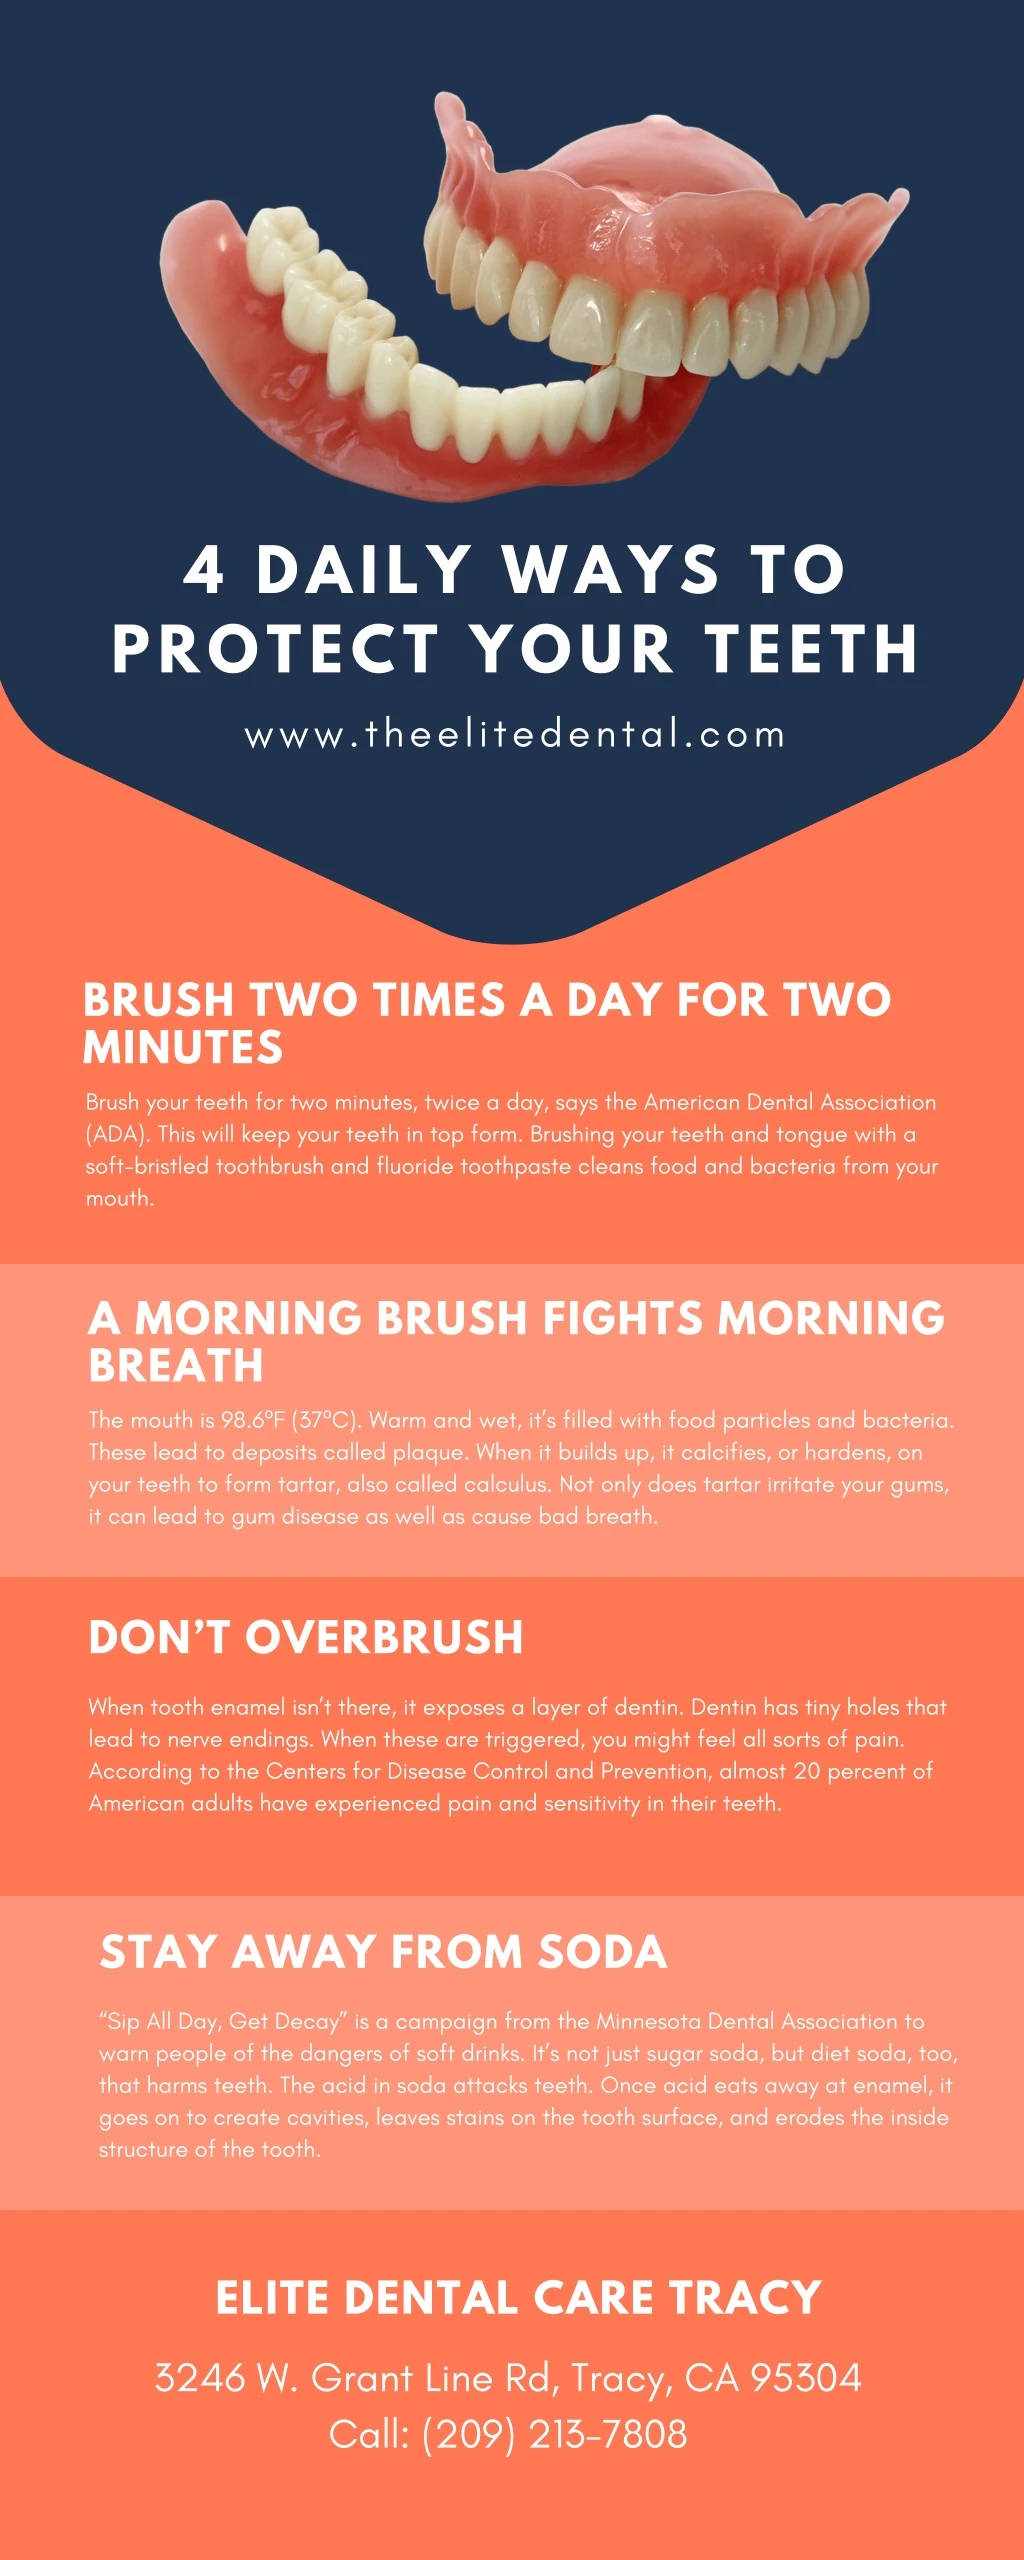 4 daily ways to protect your teeth